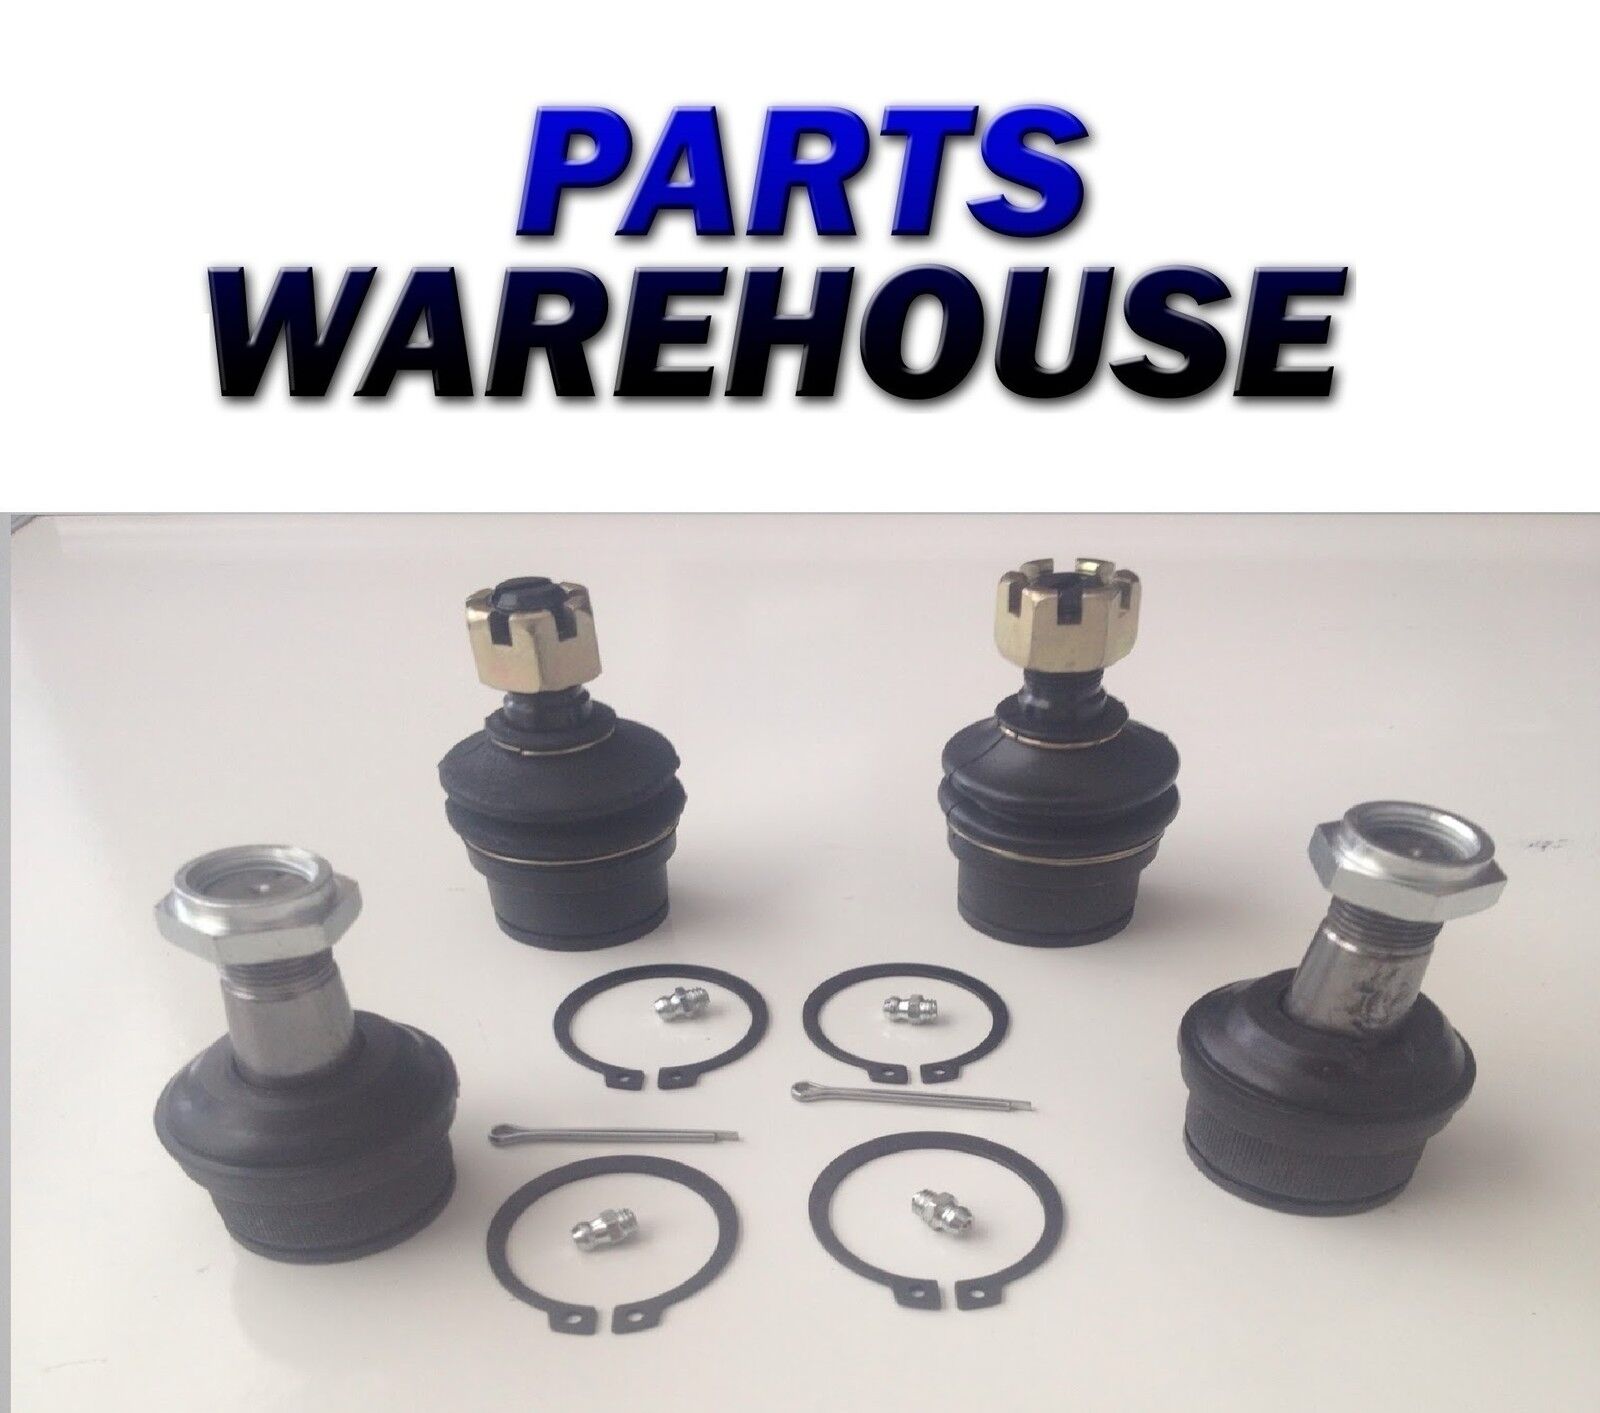 4 Front Upper And Lower Ball Joints Lifetime Warranty